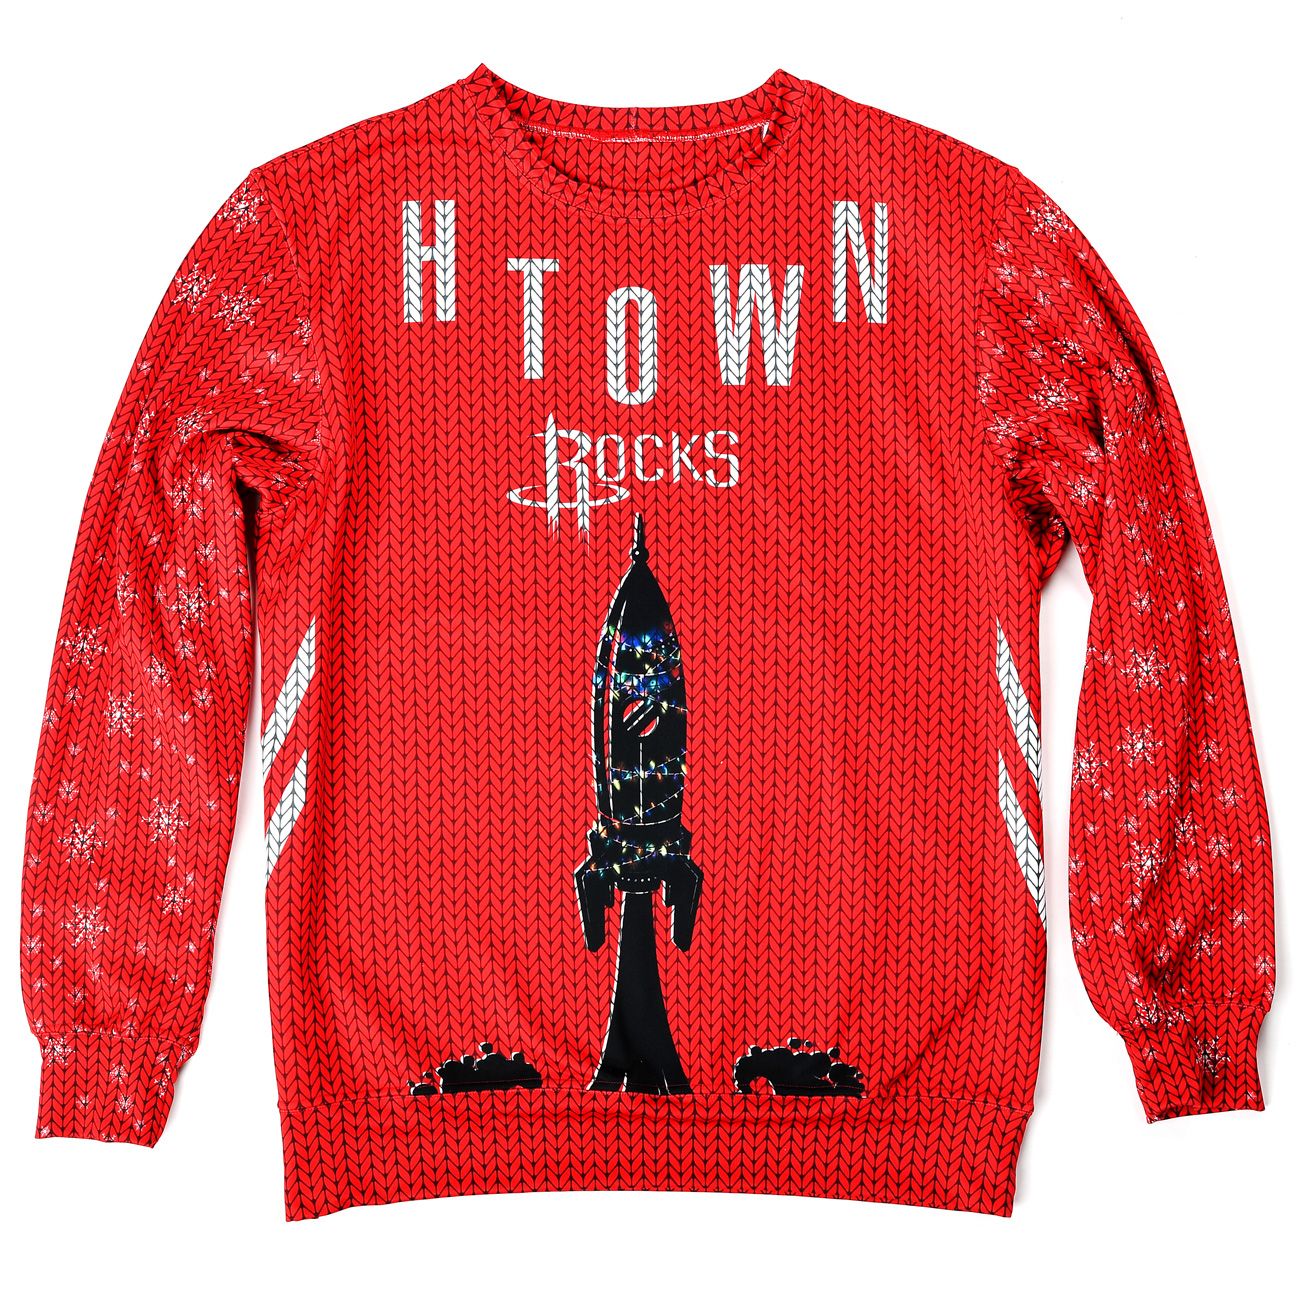 Rockets ugly sweater